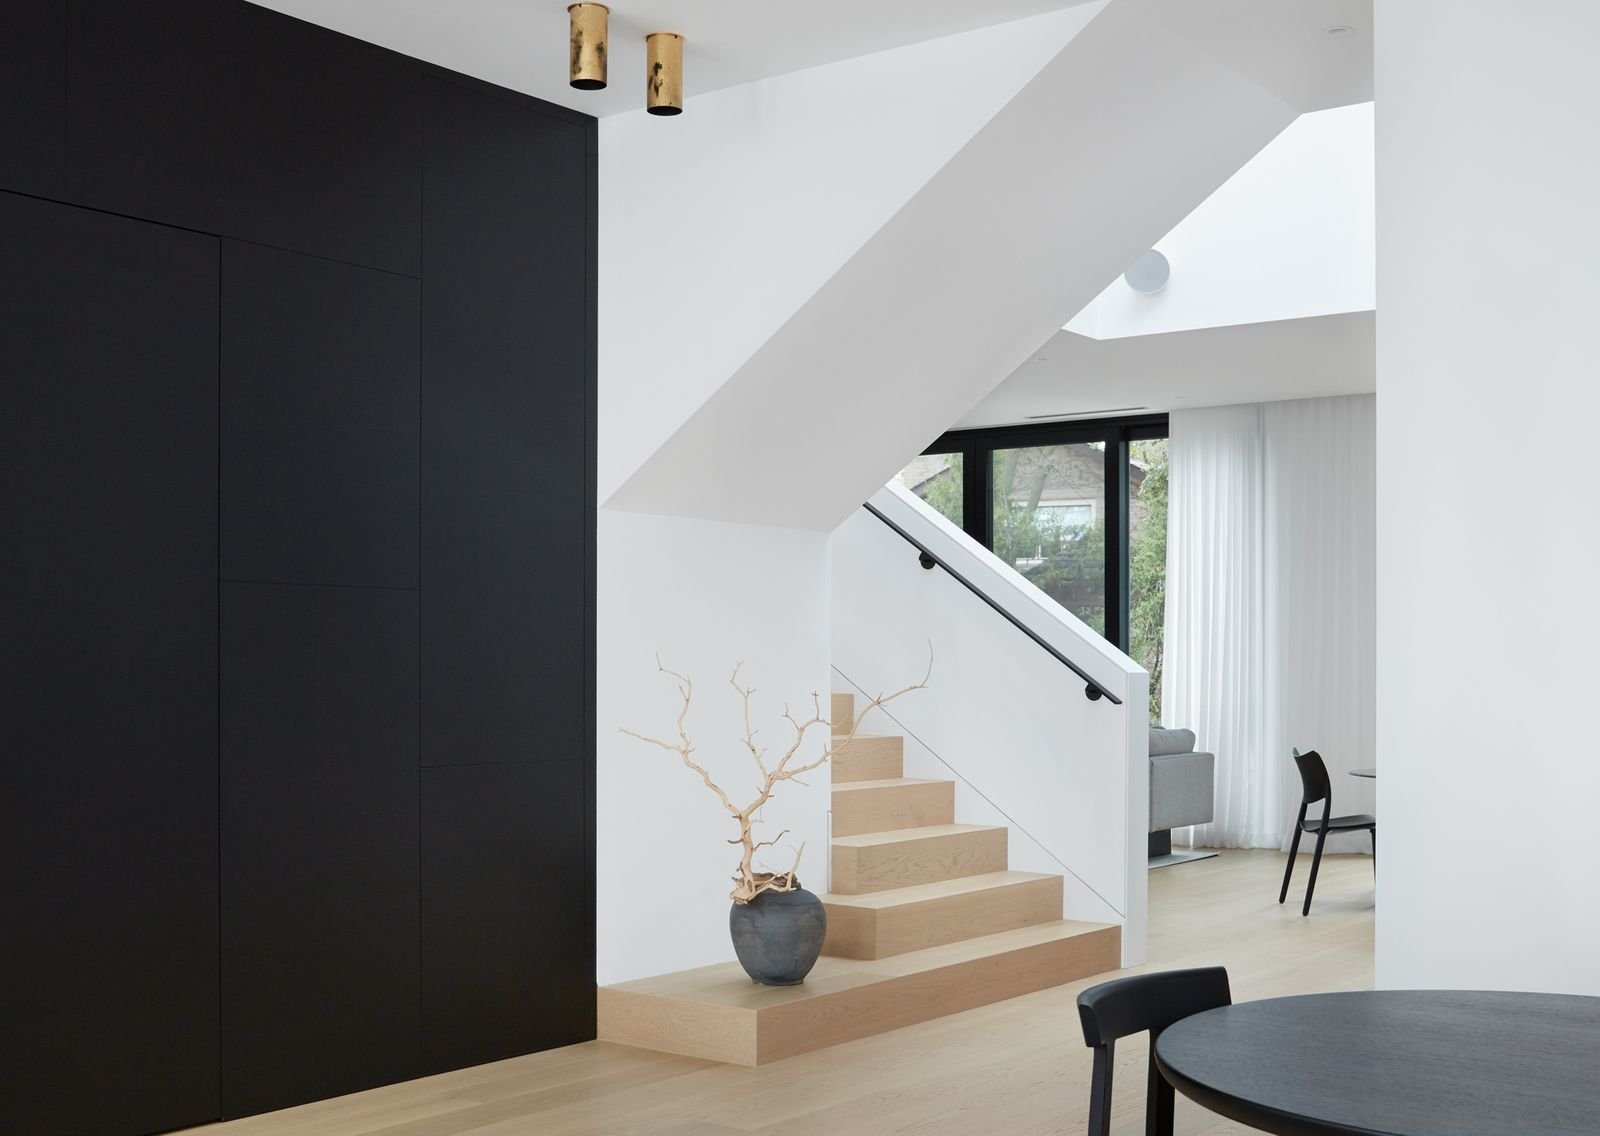 Home Design With Black and White Contrasting Elements and Clean Architectural Lines